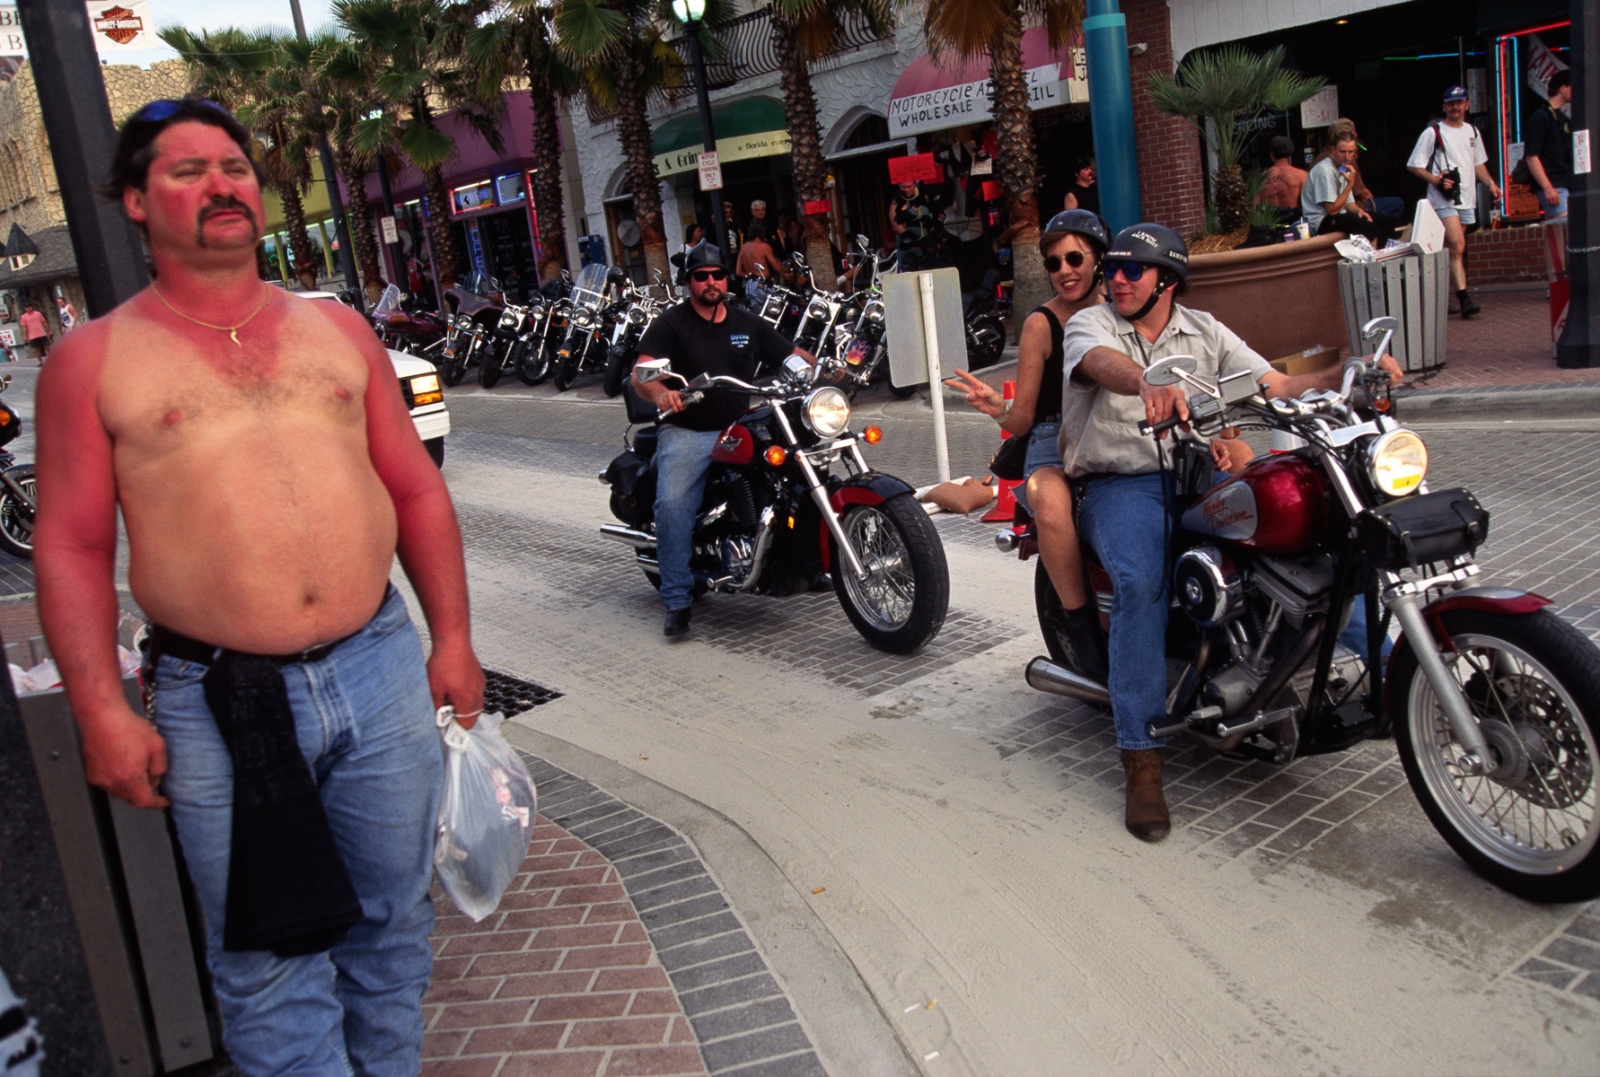 Bike Week - Some bikers got more than they bargained for.